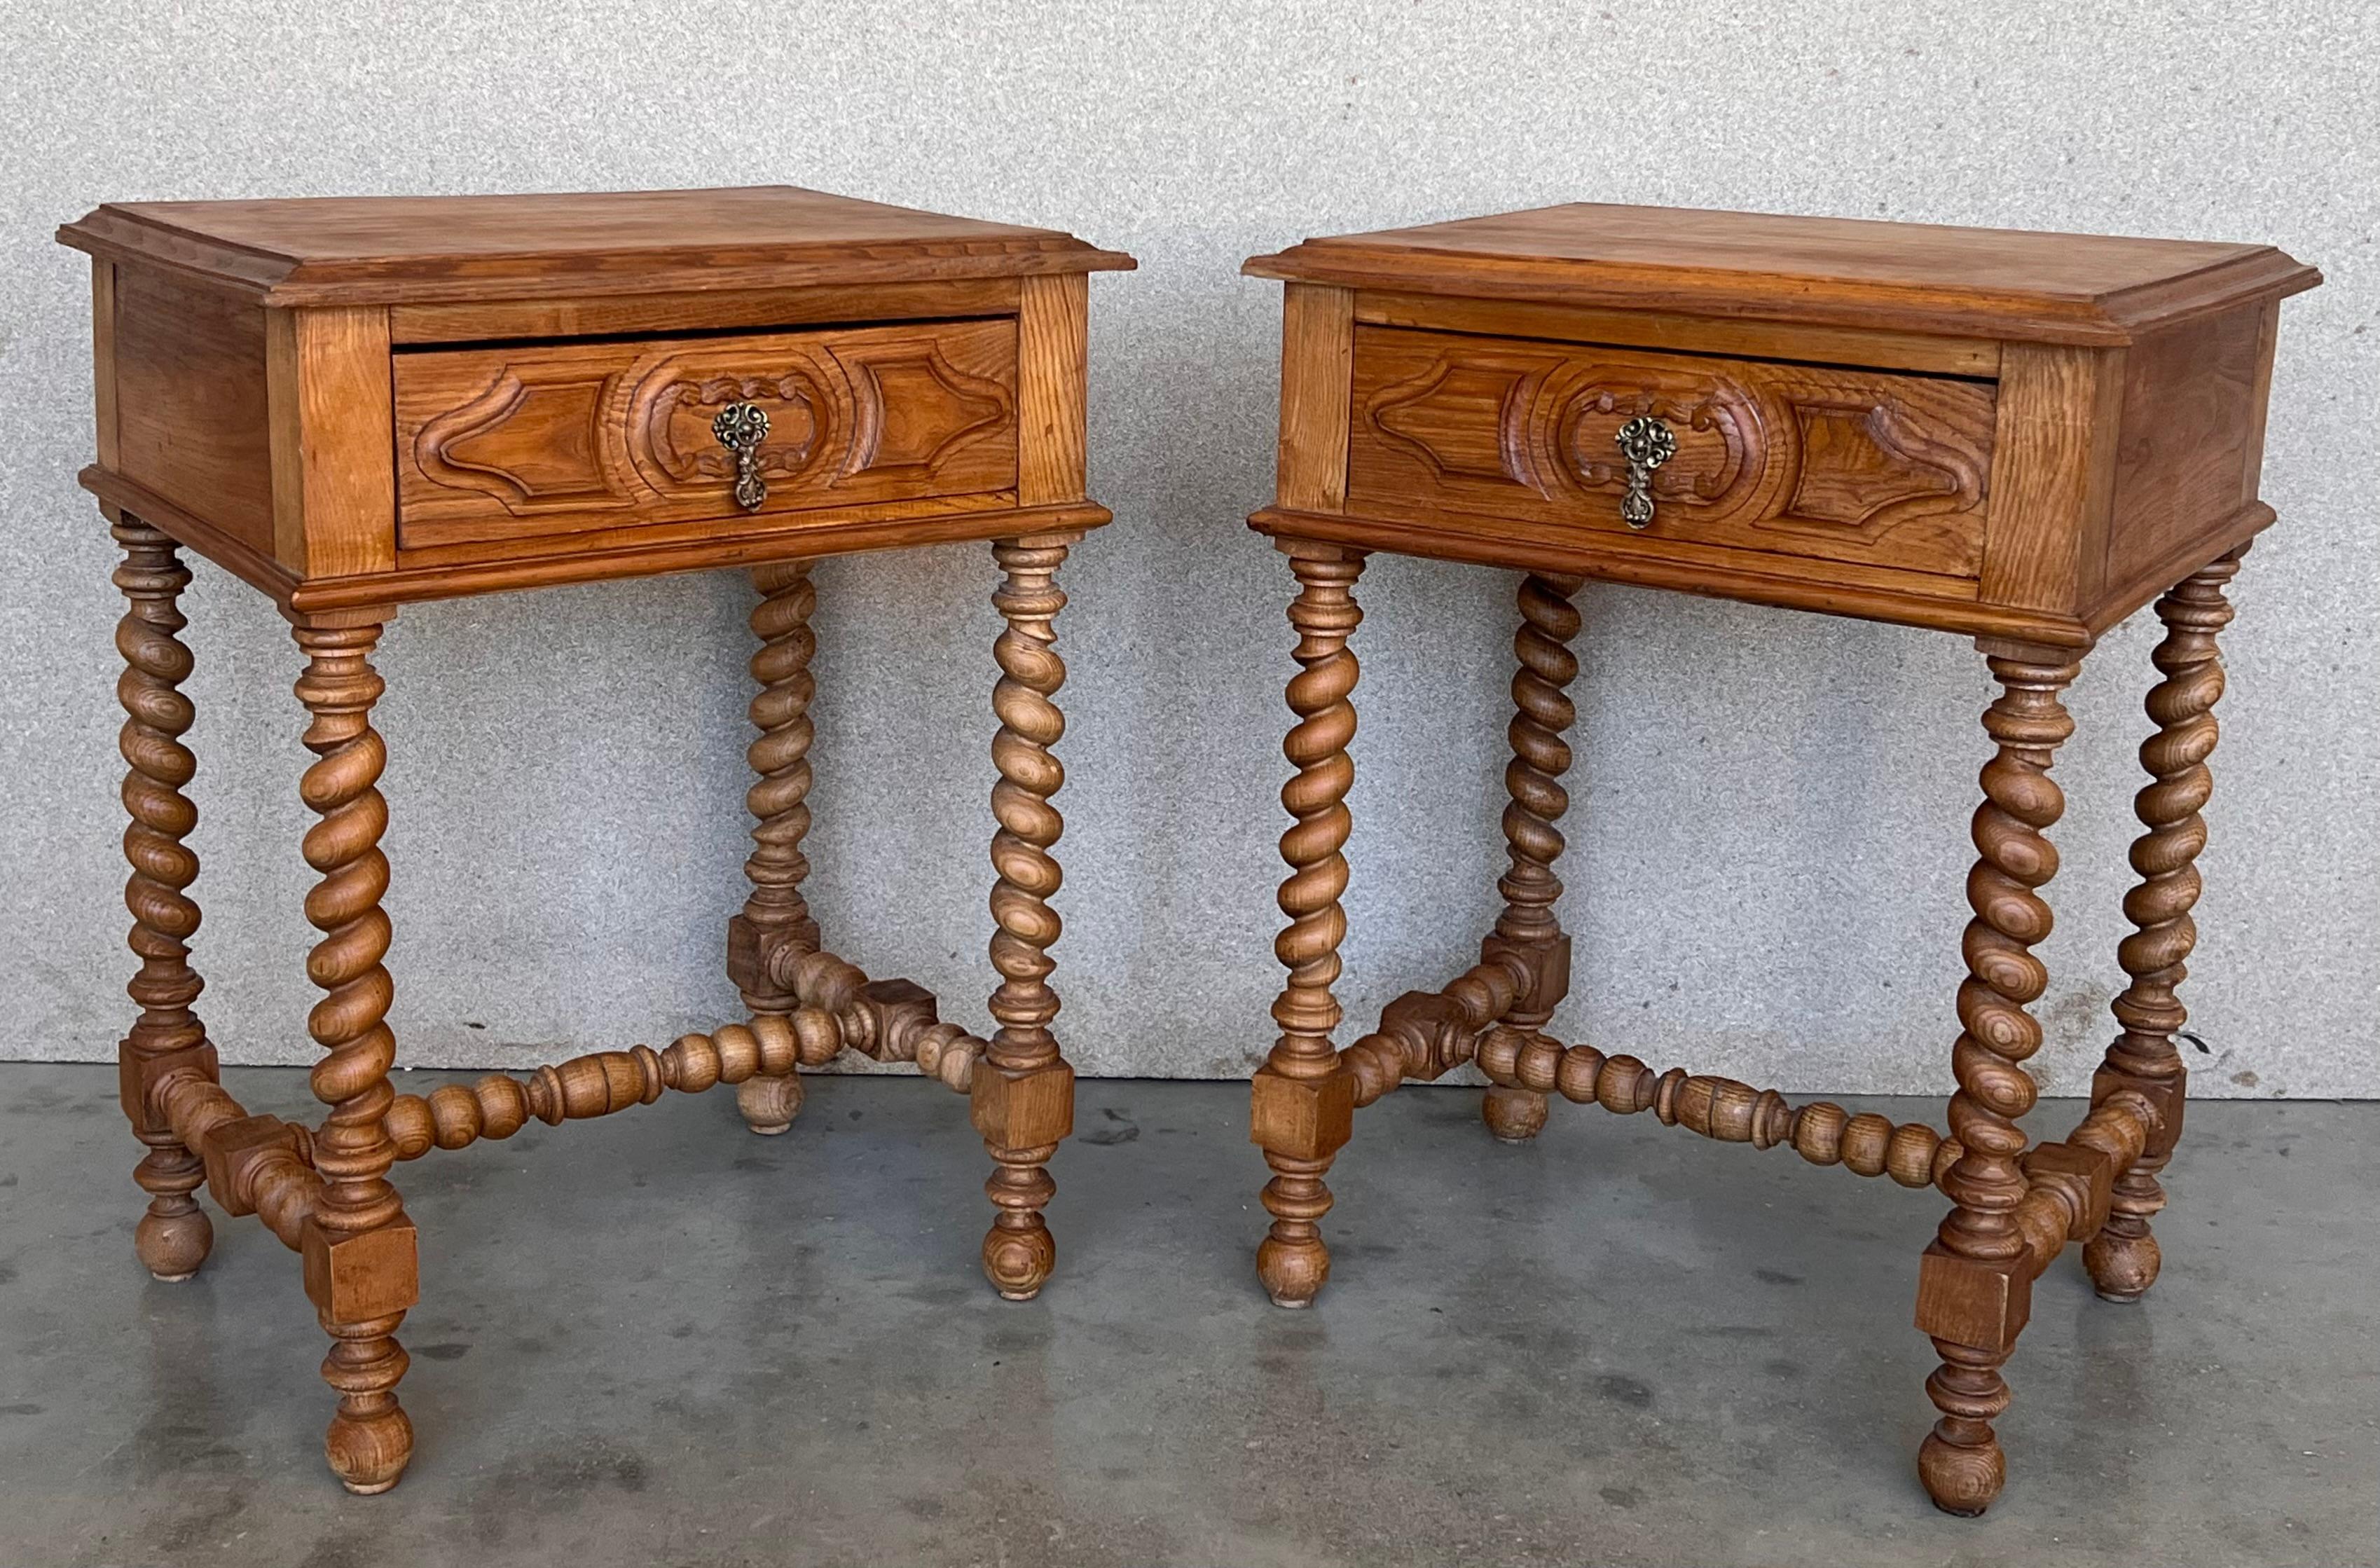 Spanish Vintage French Nightstands in Solid Carved Oak with Turned Columns, Set of 2